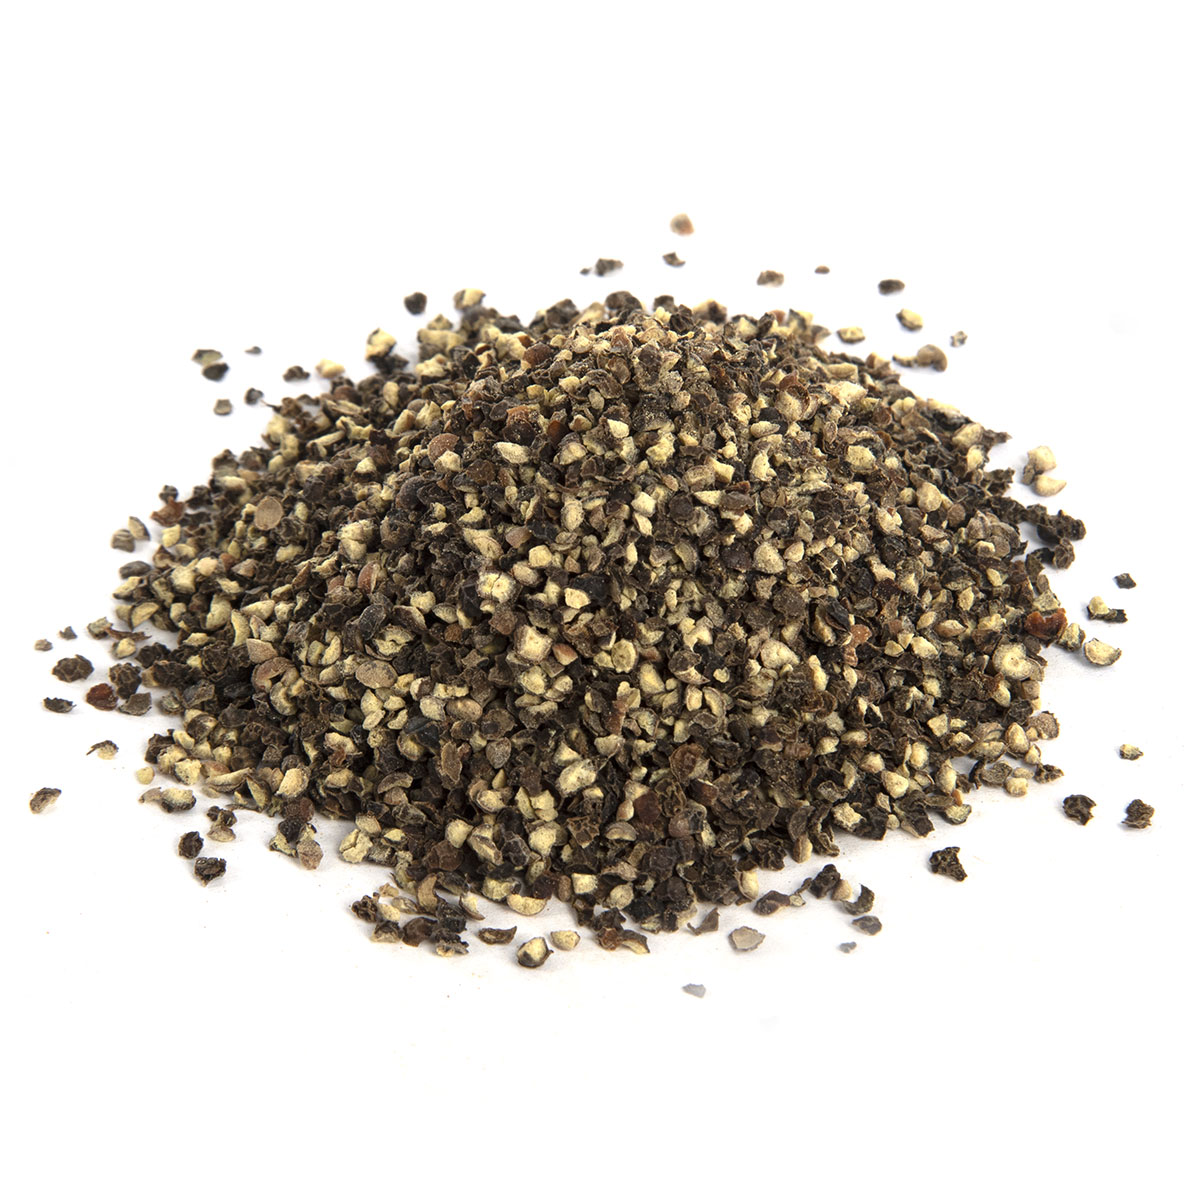 Spice Company Online - Pepper Black Cracked